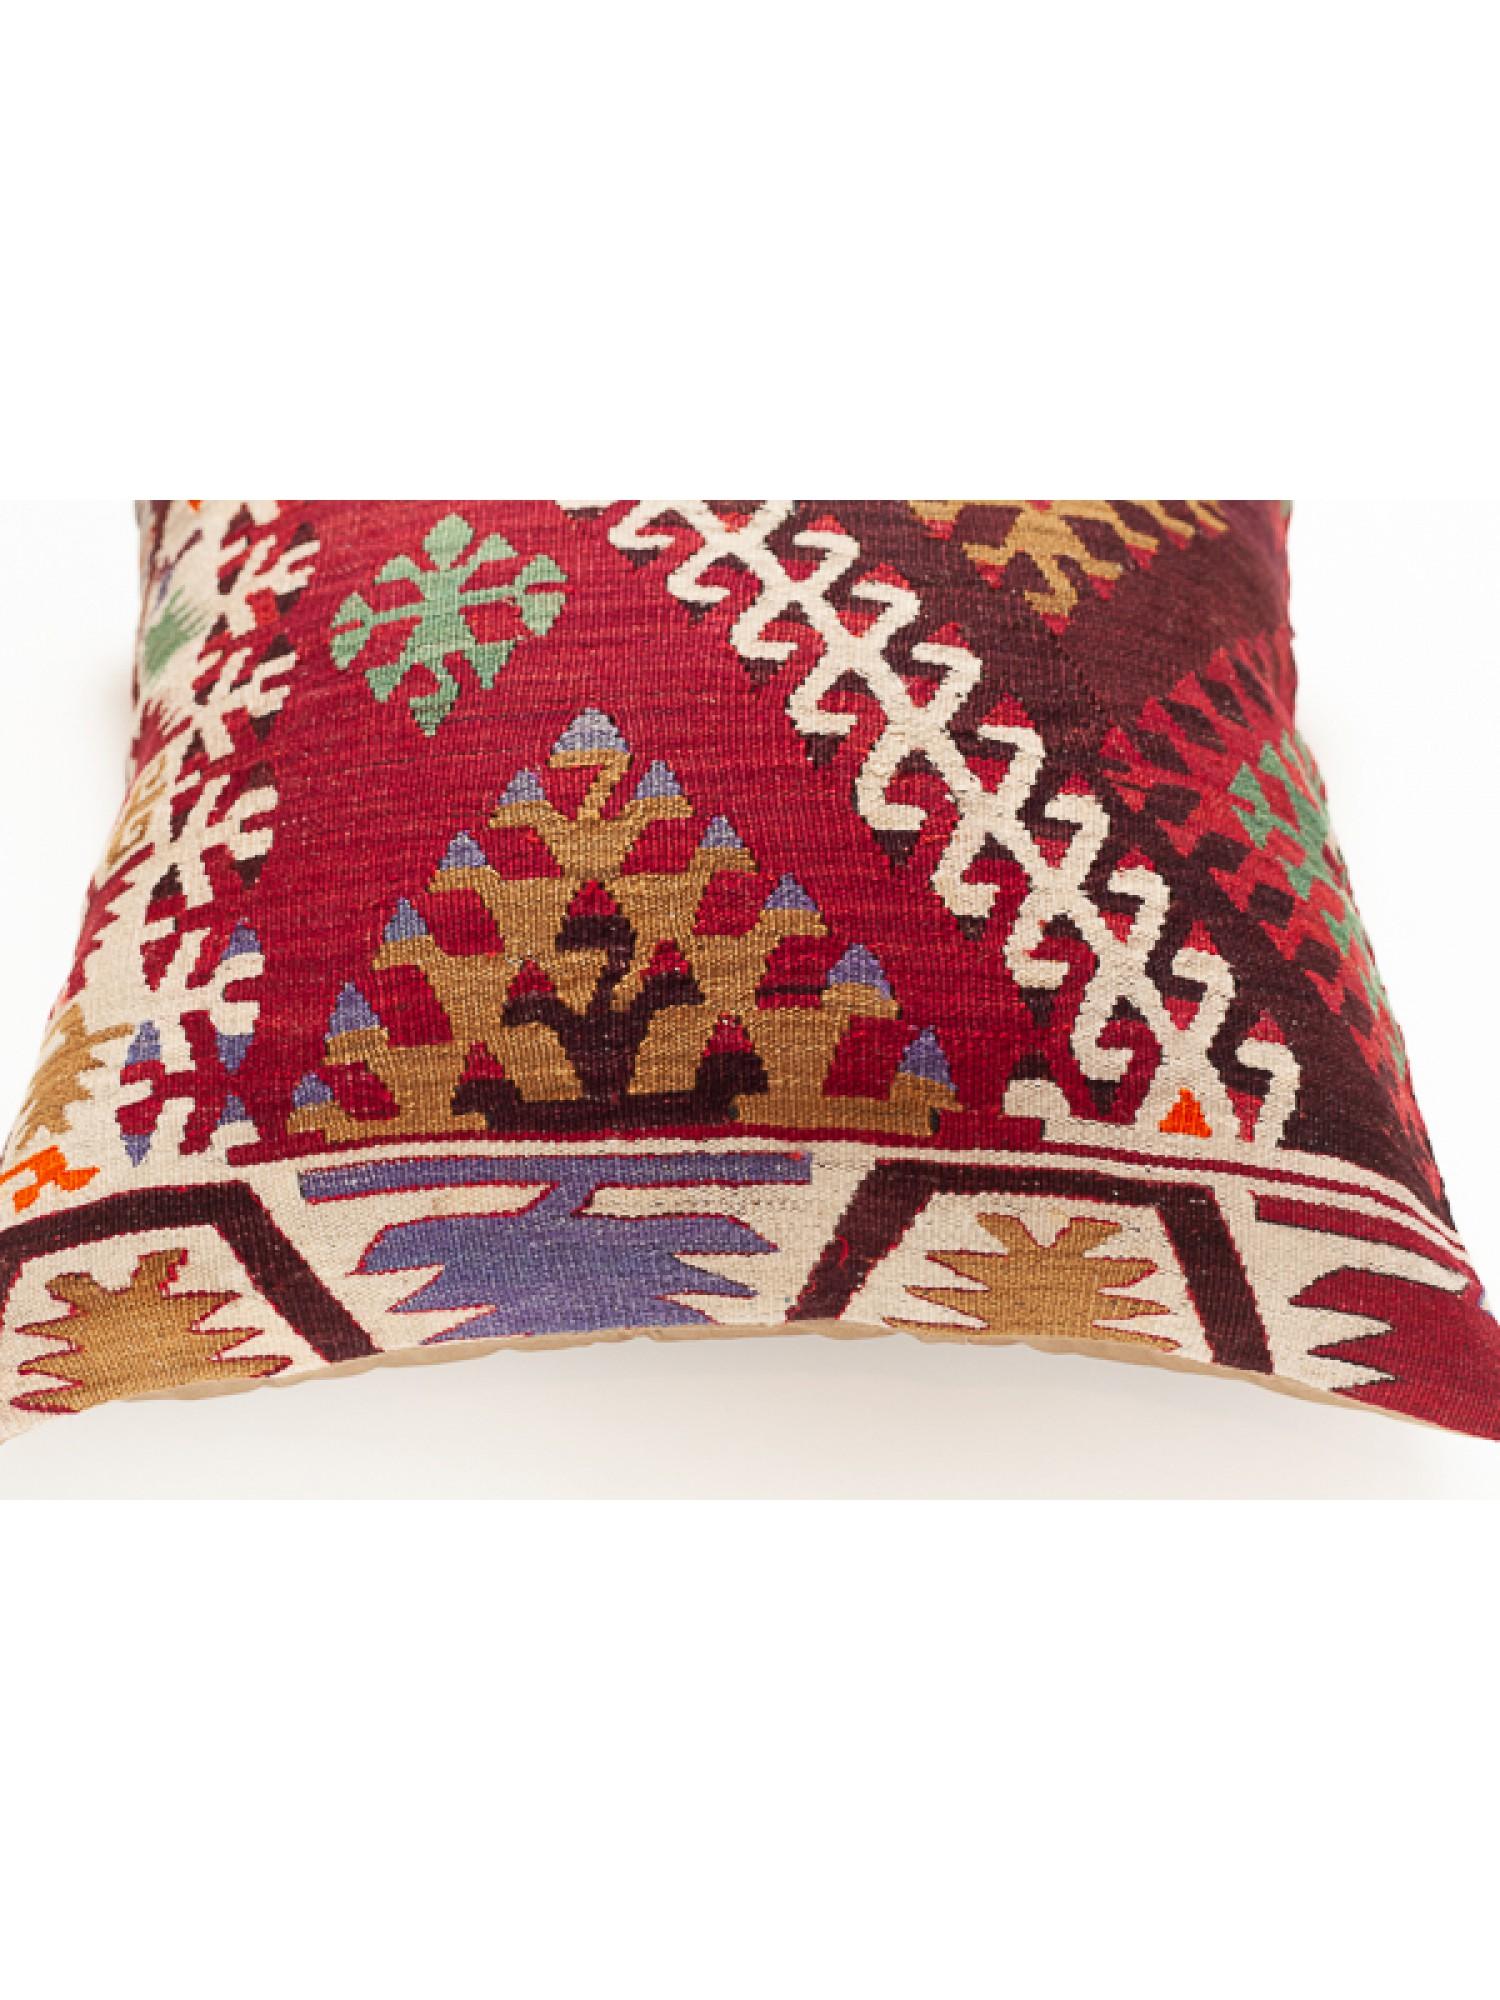 Antique & Old Kilim Cushion Cover, Turkish Yastik Modern Pillow KC3539 In Good Condition For Sale In Tokyo, JP